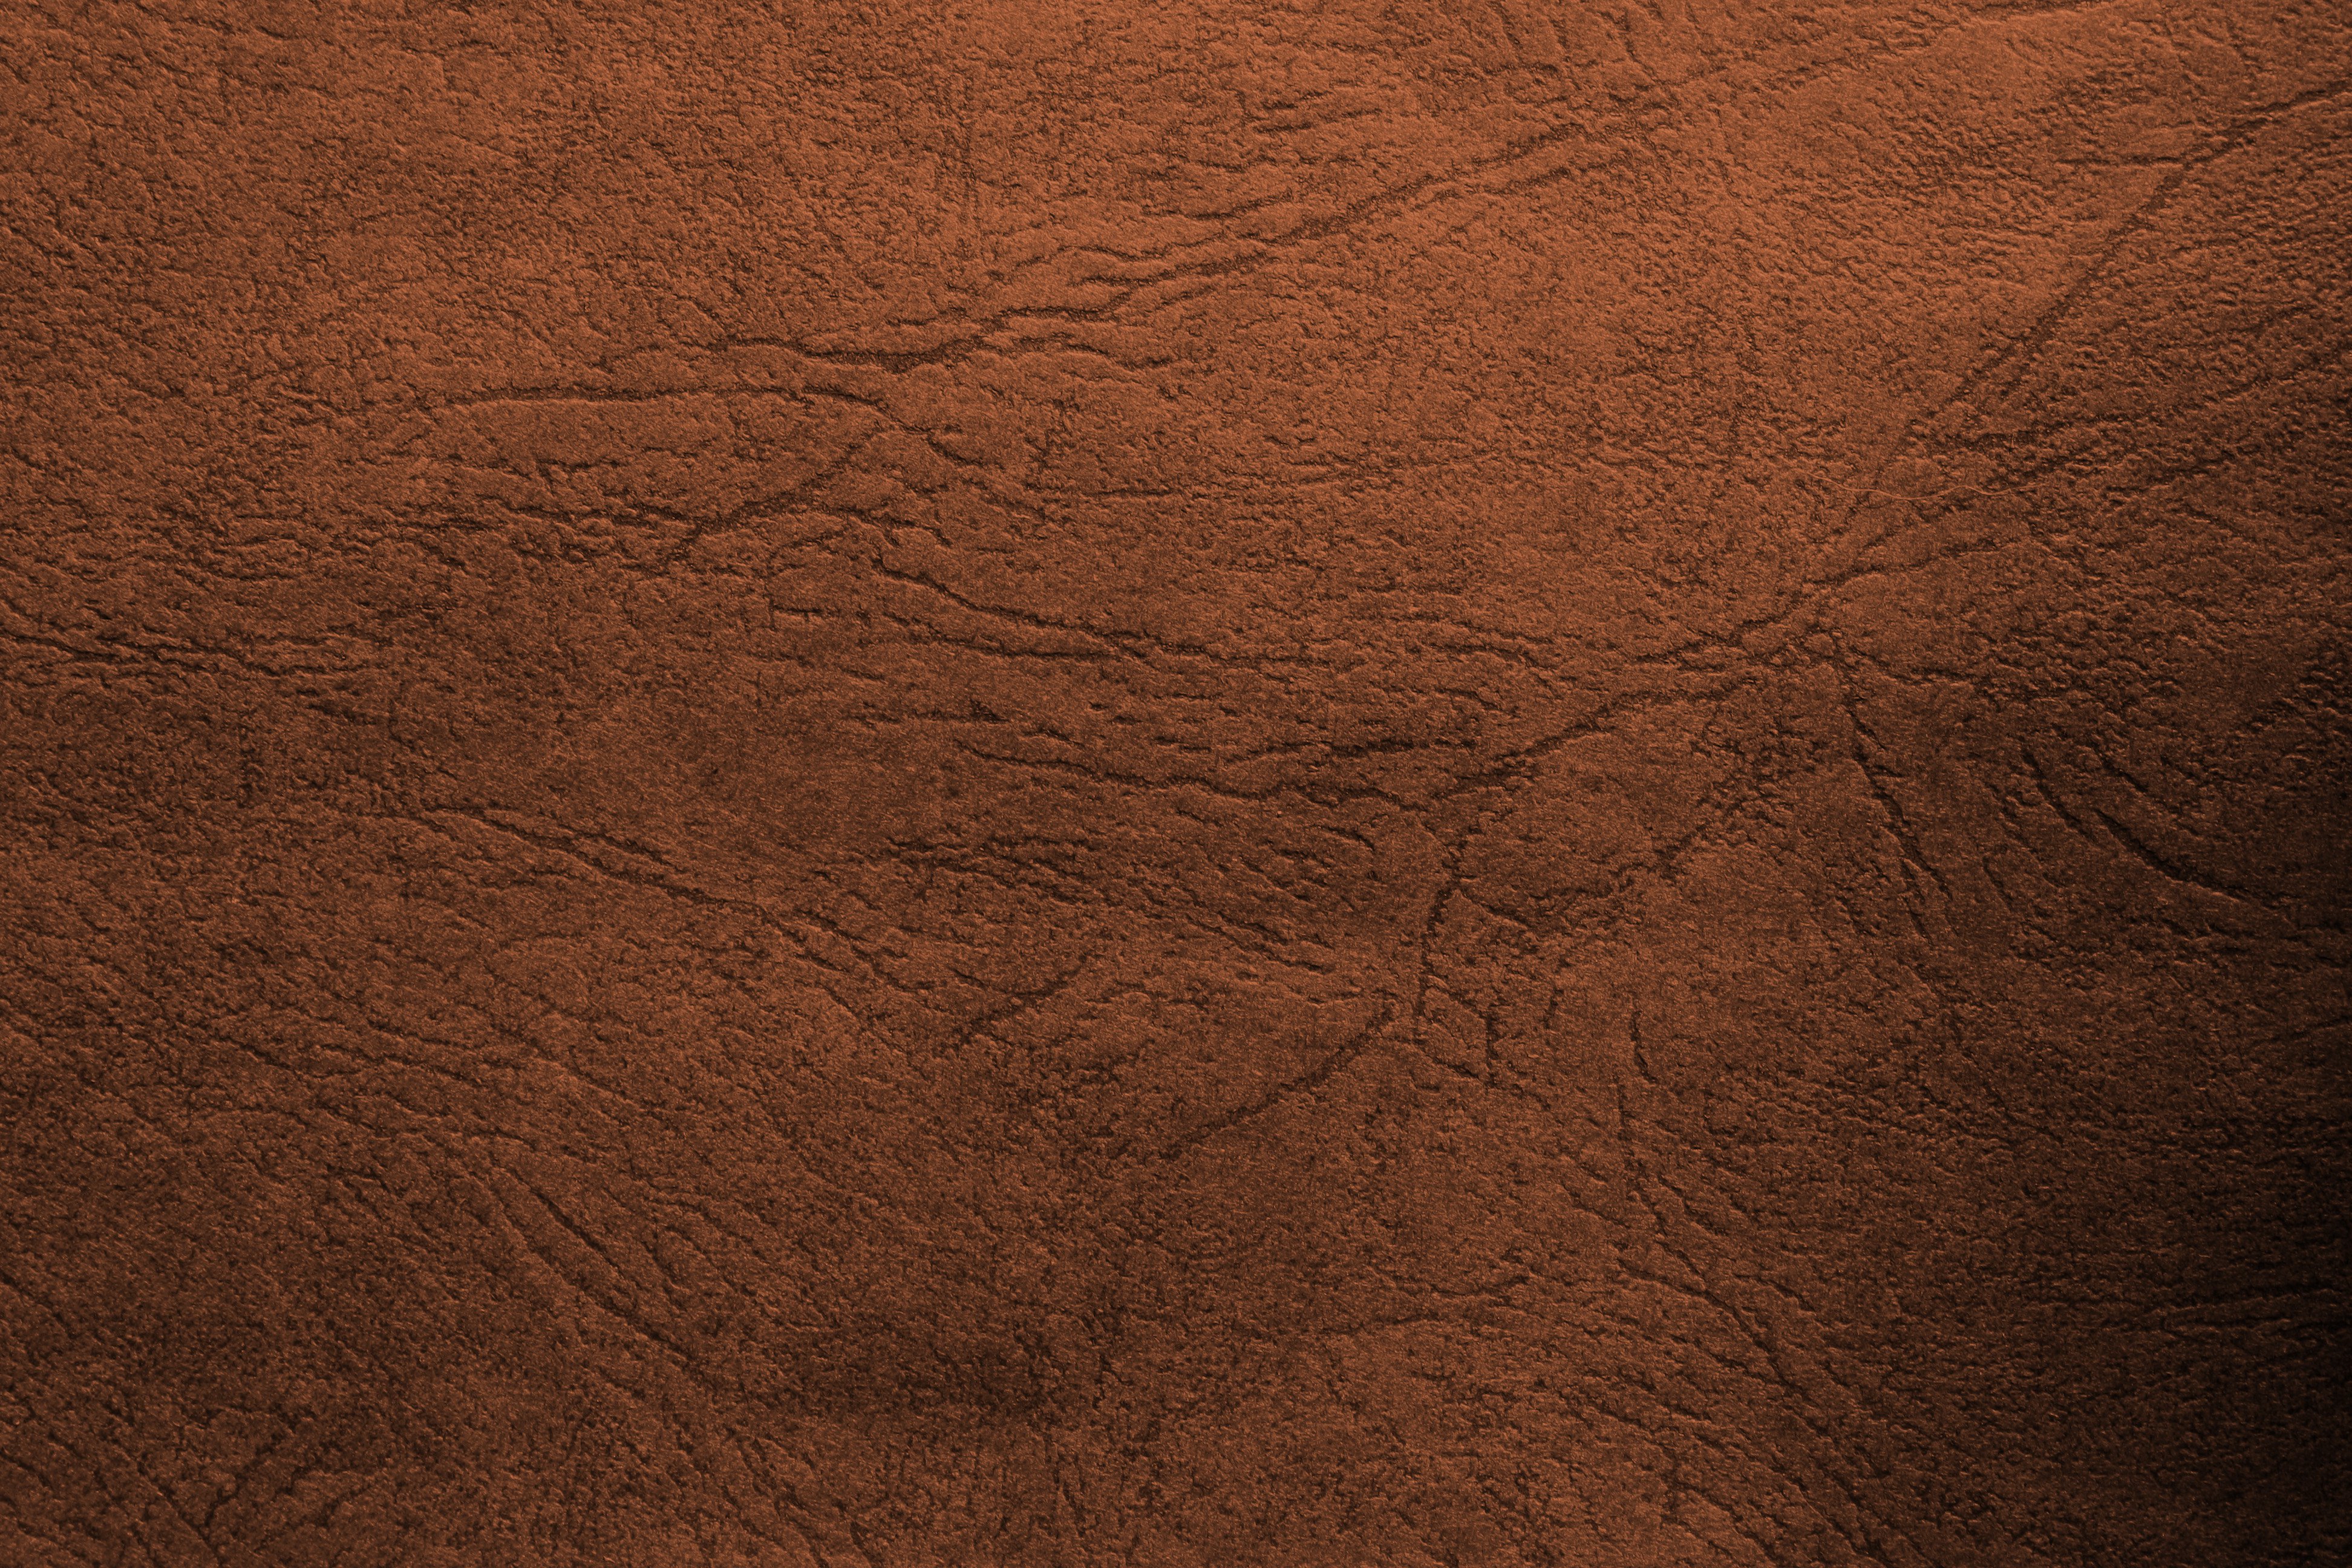 Brown Leather Texture High Resolution Photo Dimensions